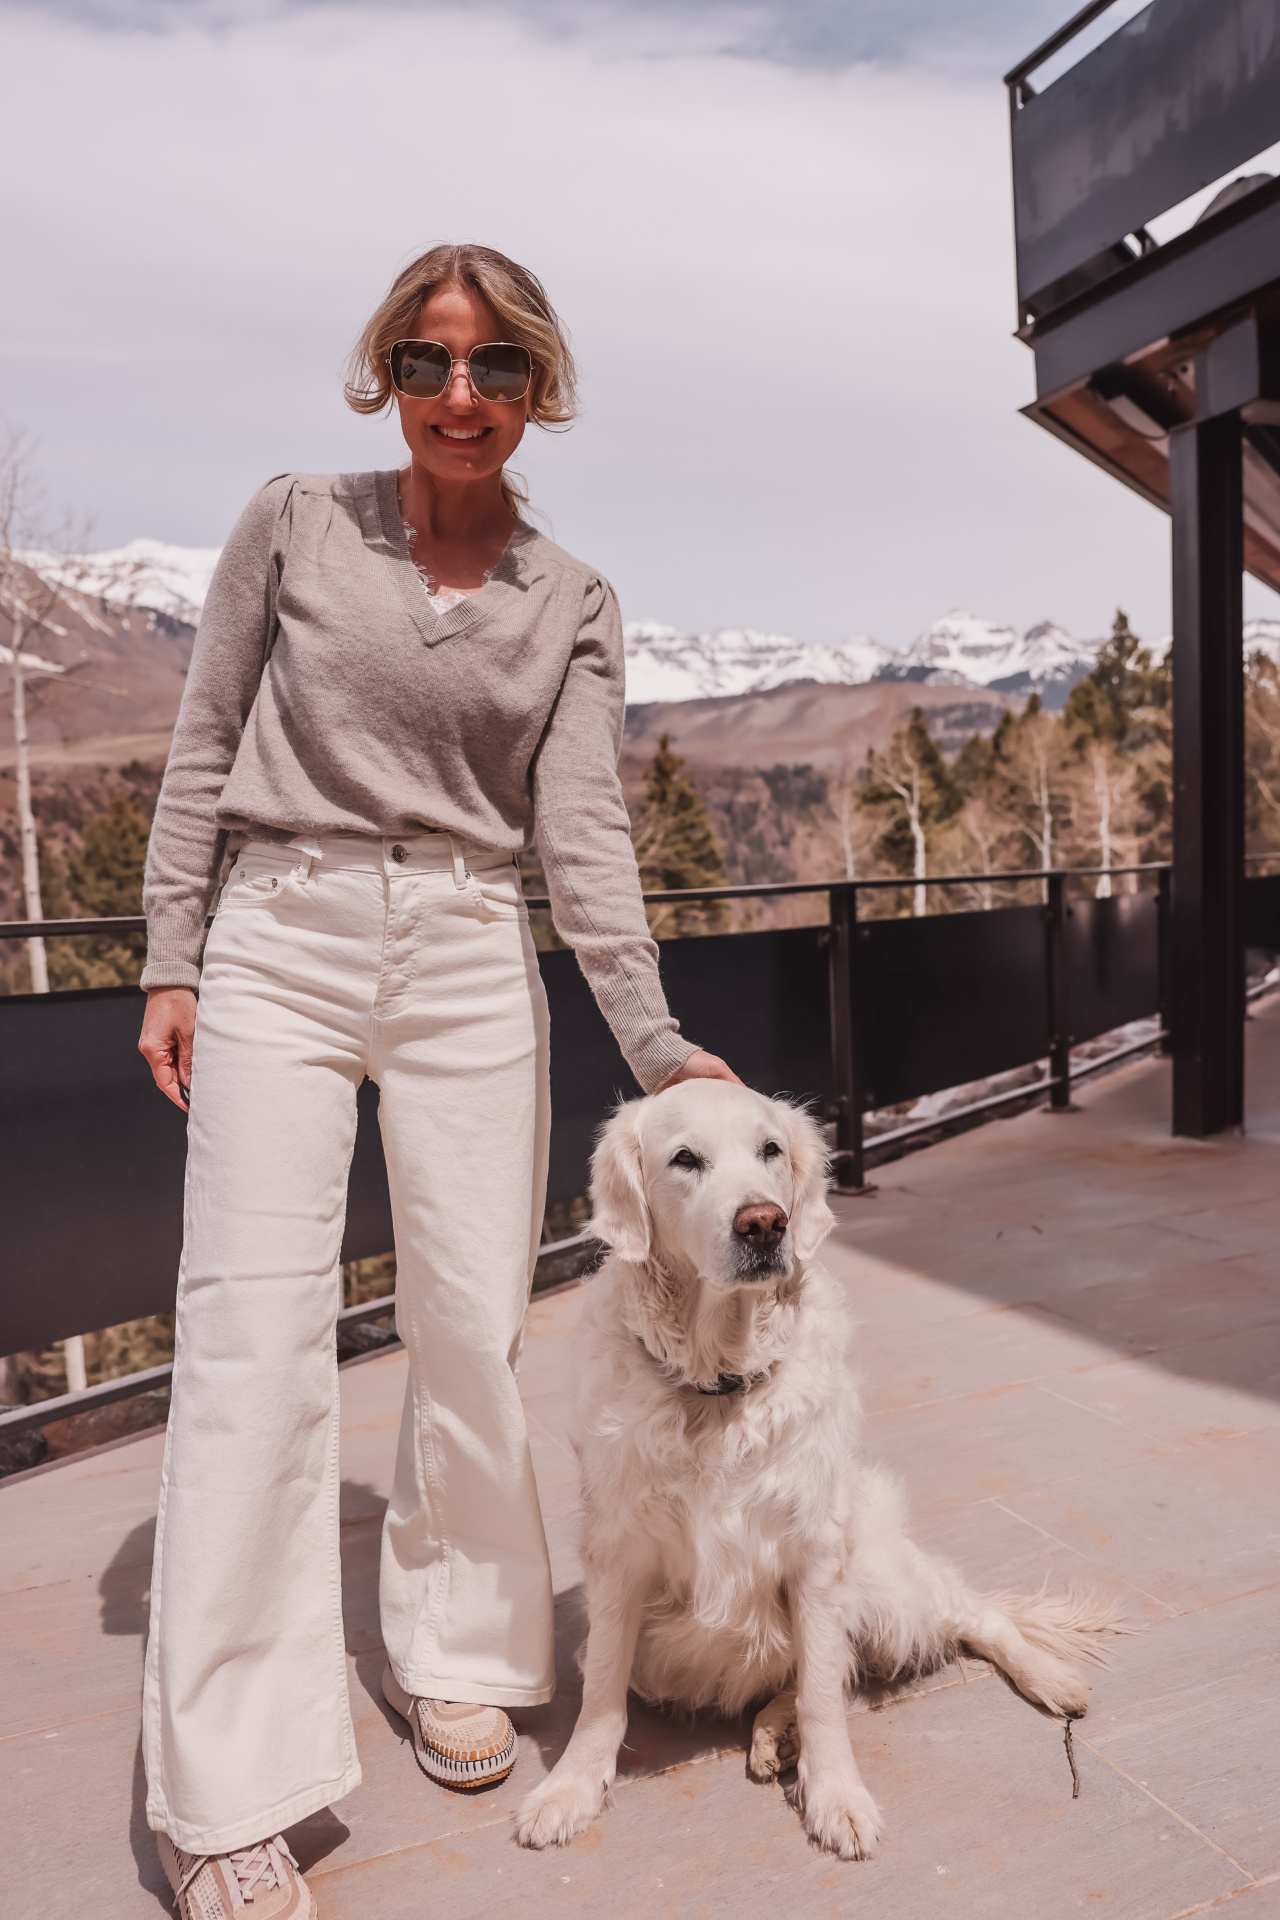 summer self care, summer self care essentials, sun protection, maui jim sunglasses, polarized sunglasses, triton sunglasses by maui jim, brochu walker lace sweater, maje wide leg off white jeans, chloe sneakers, erin busbee, busbee style, telluride, colorado, lightweight sweater for summer